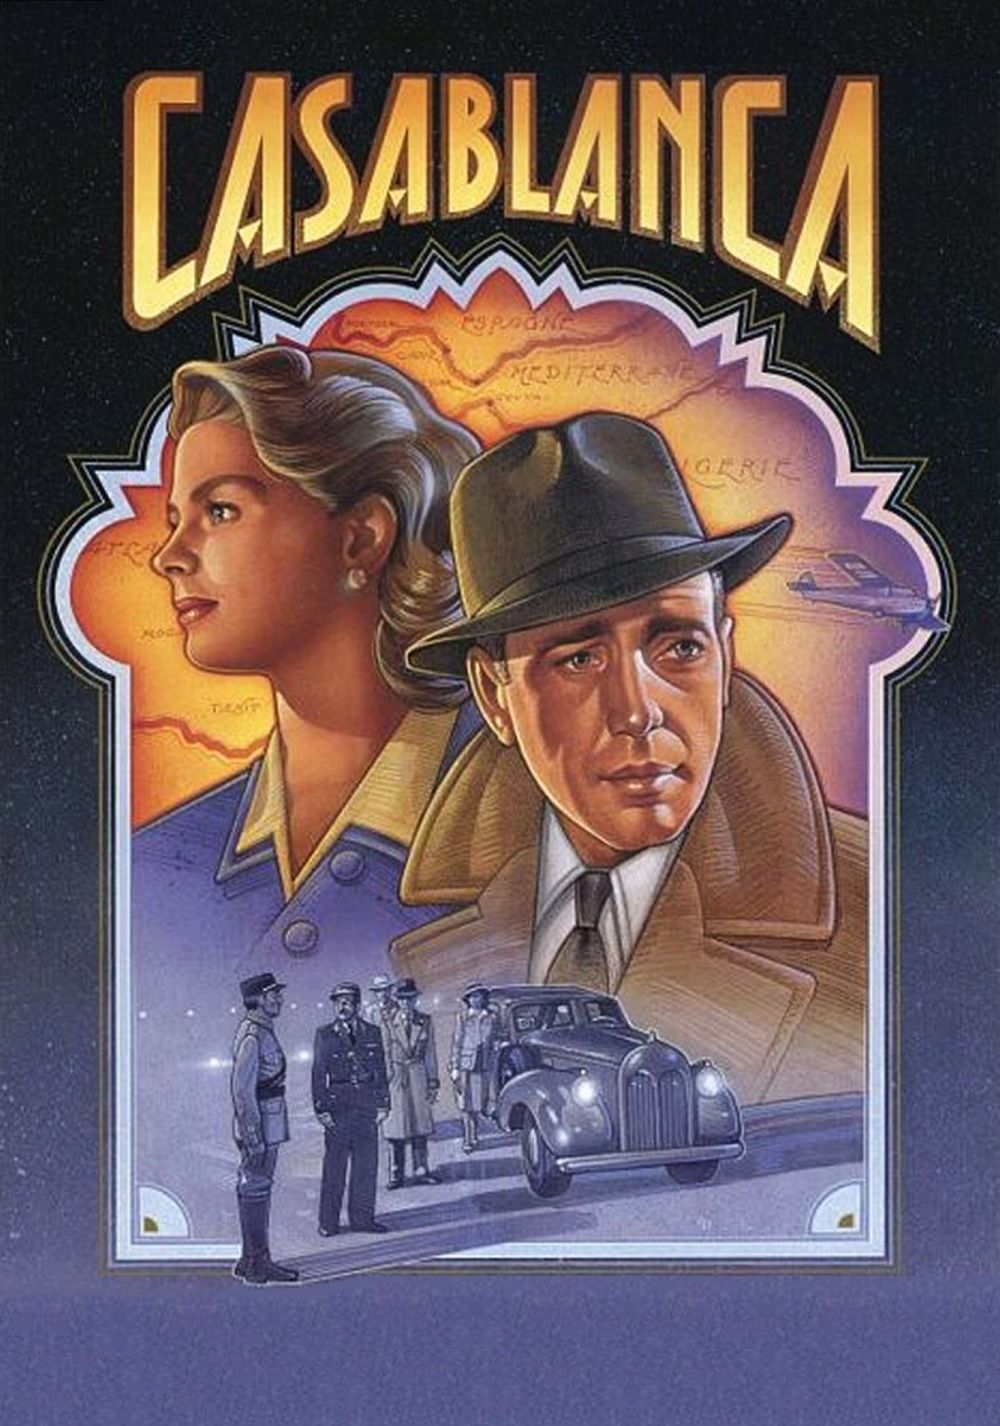 Casablanca Movie Poster - ID: 79965 - Image Abyss.